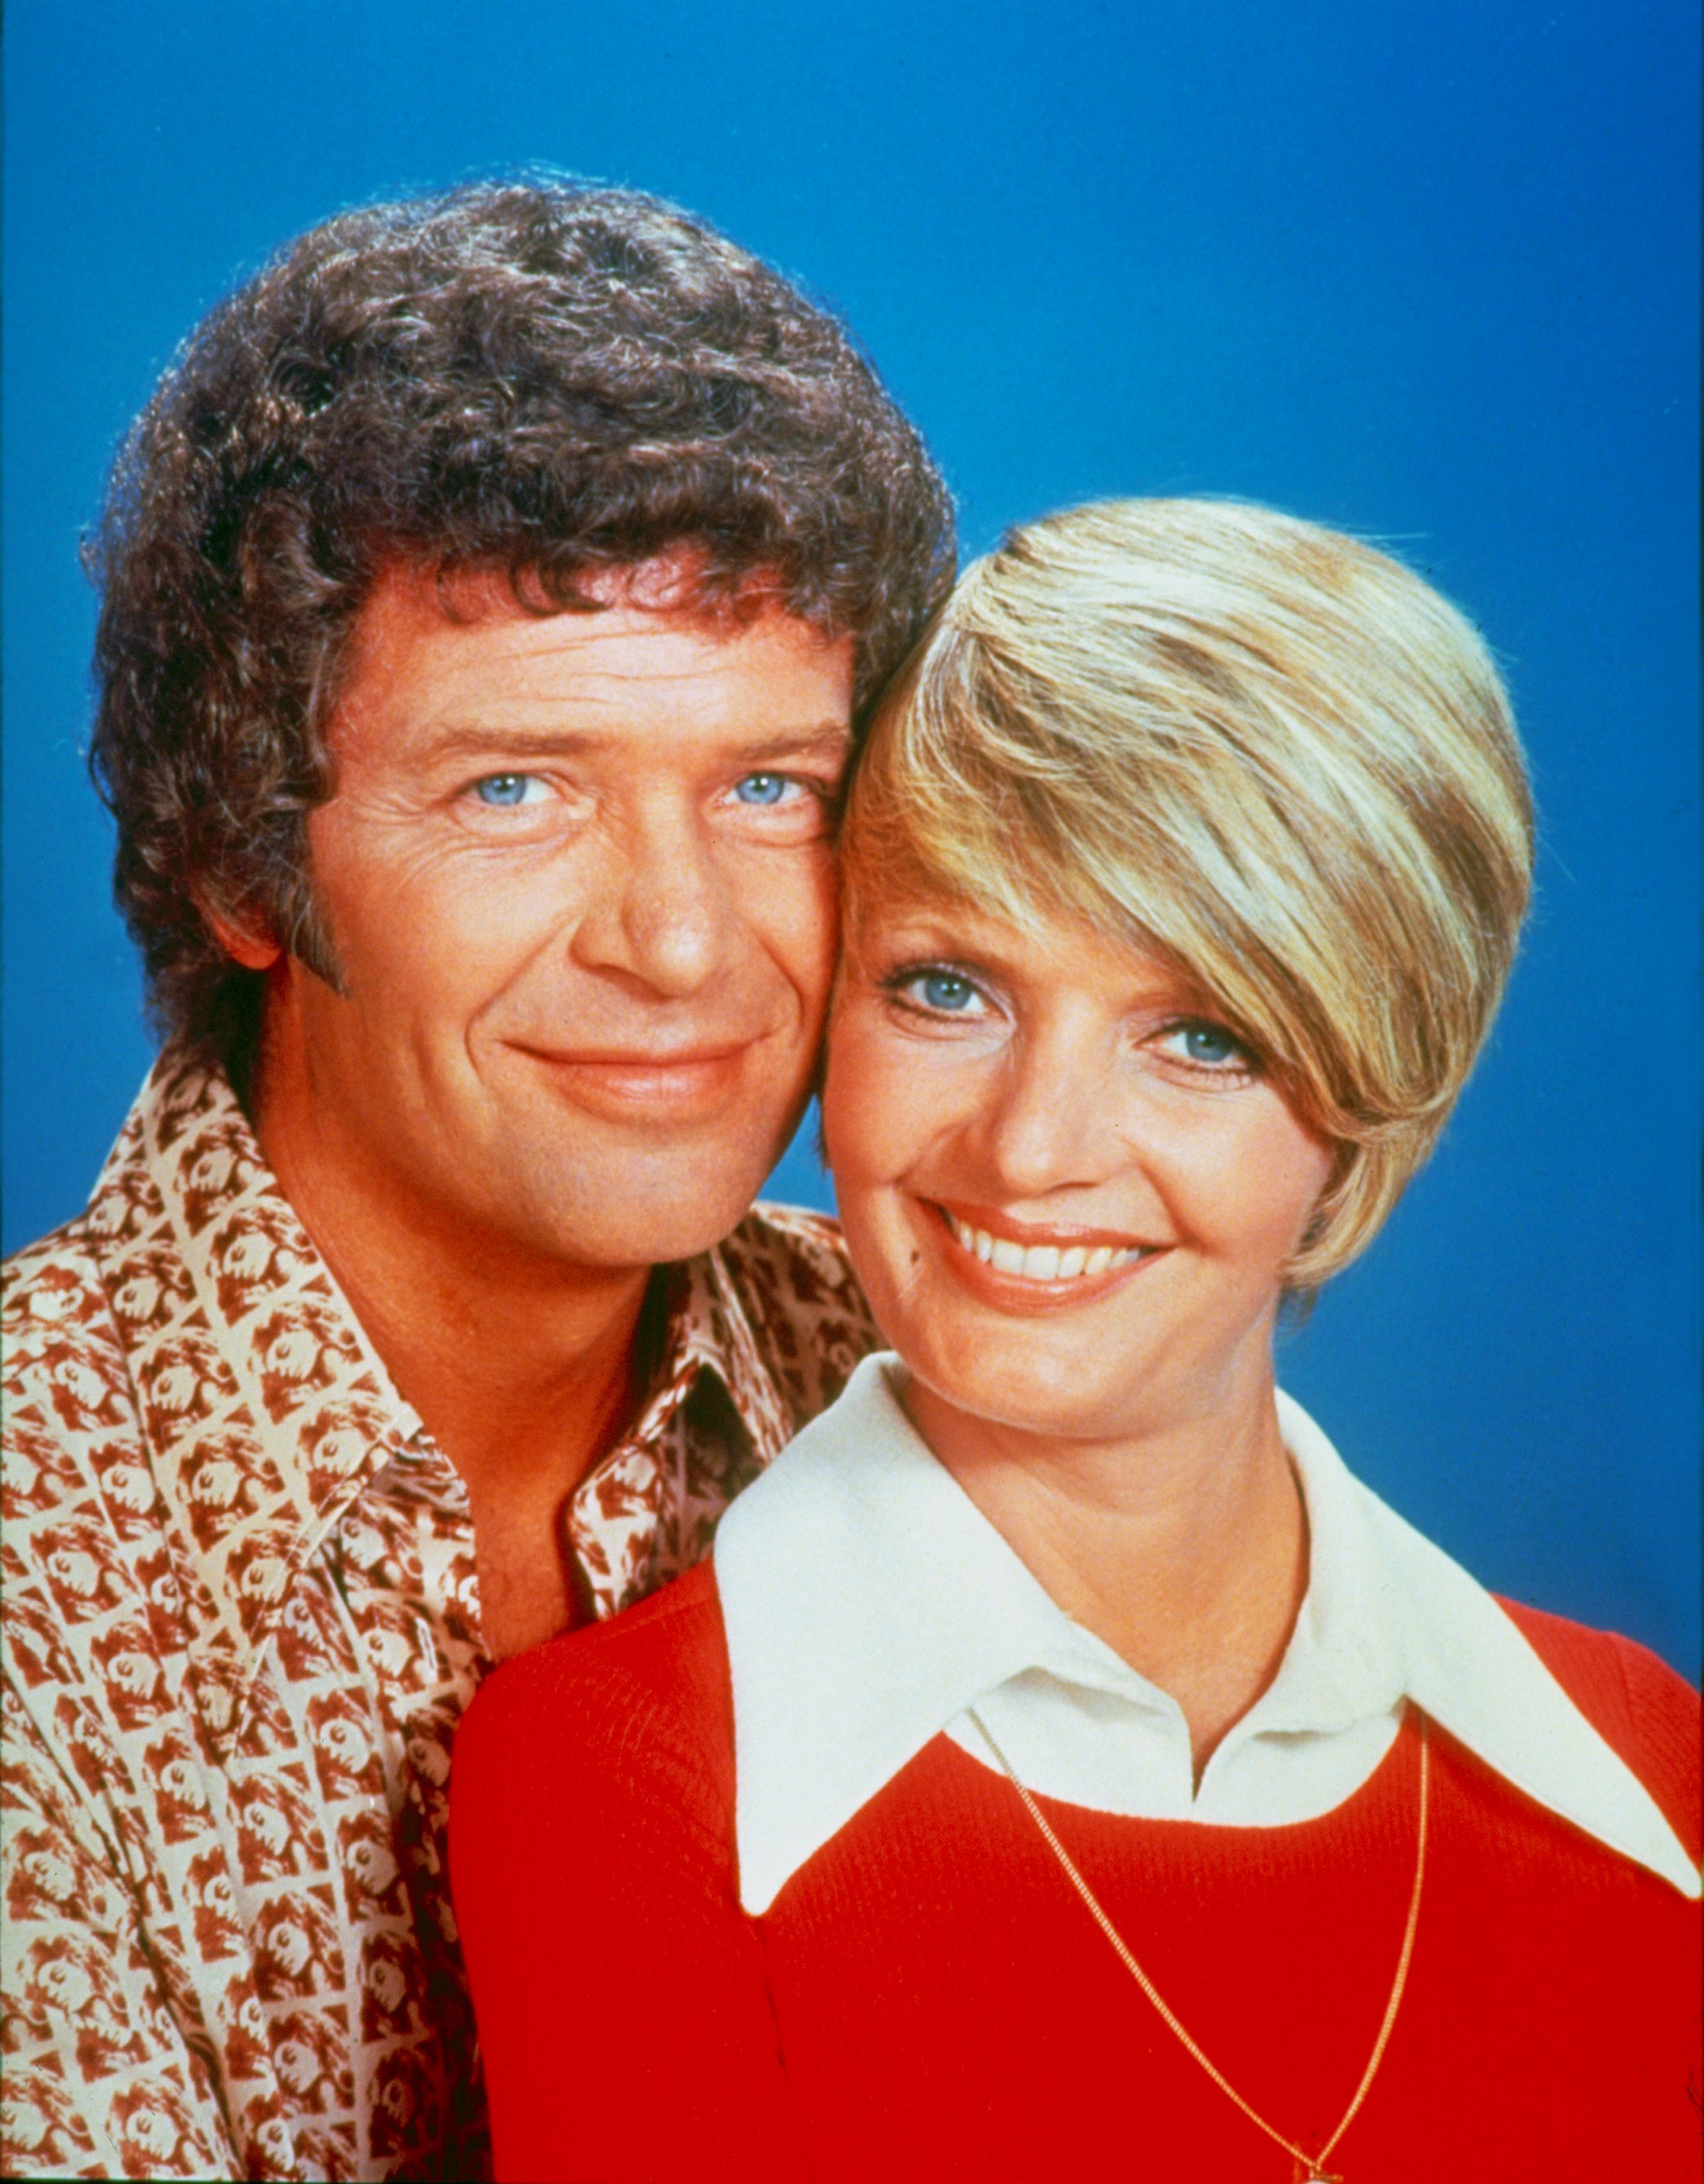 Robert Reed and Florence Henderson as Mike and Carol Brady in "The Brady Bunch" in 1972 | Source: Getty Images